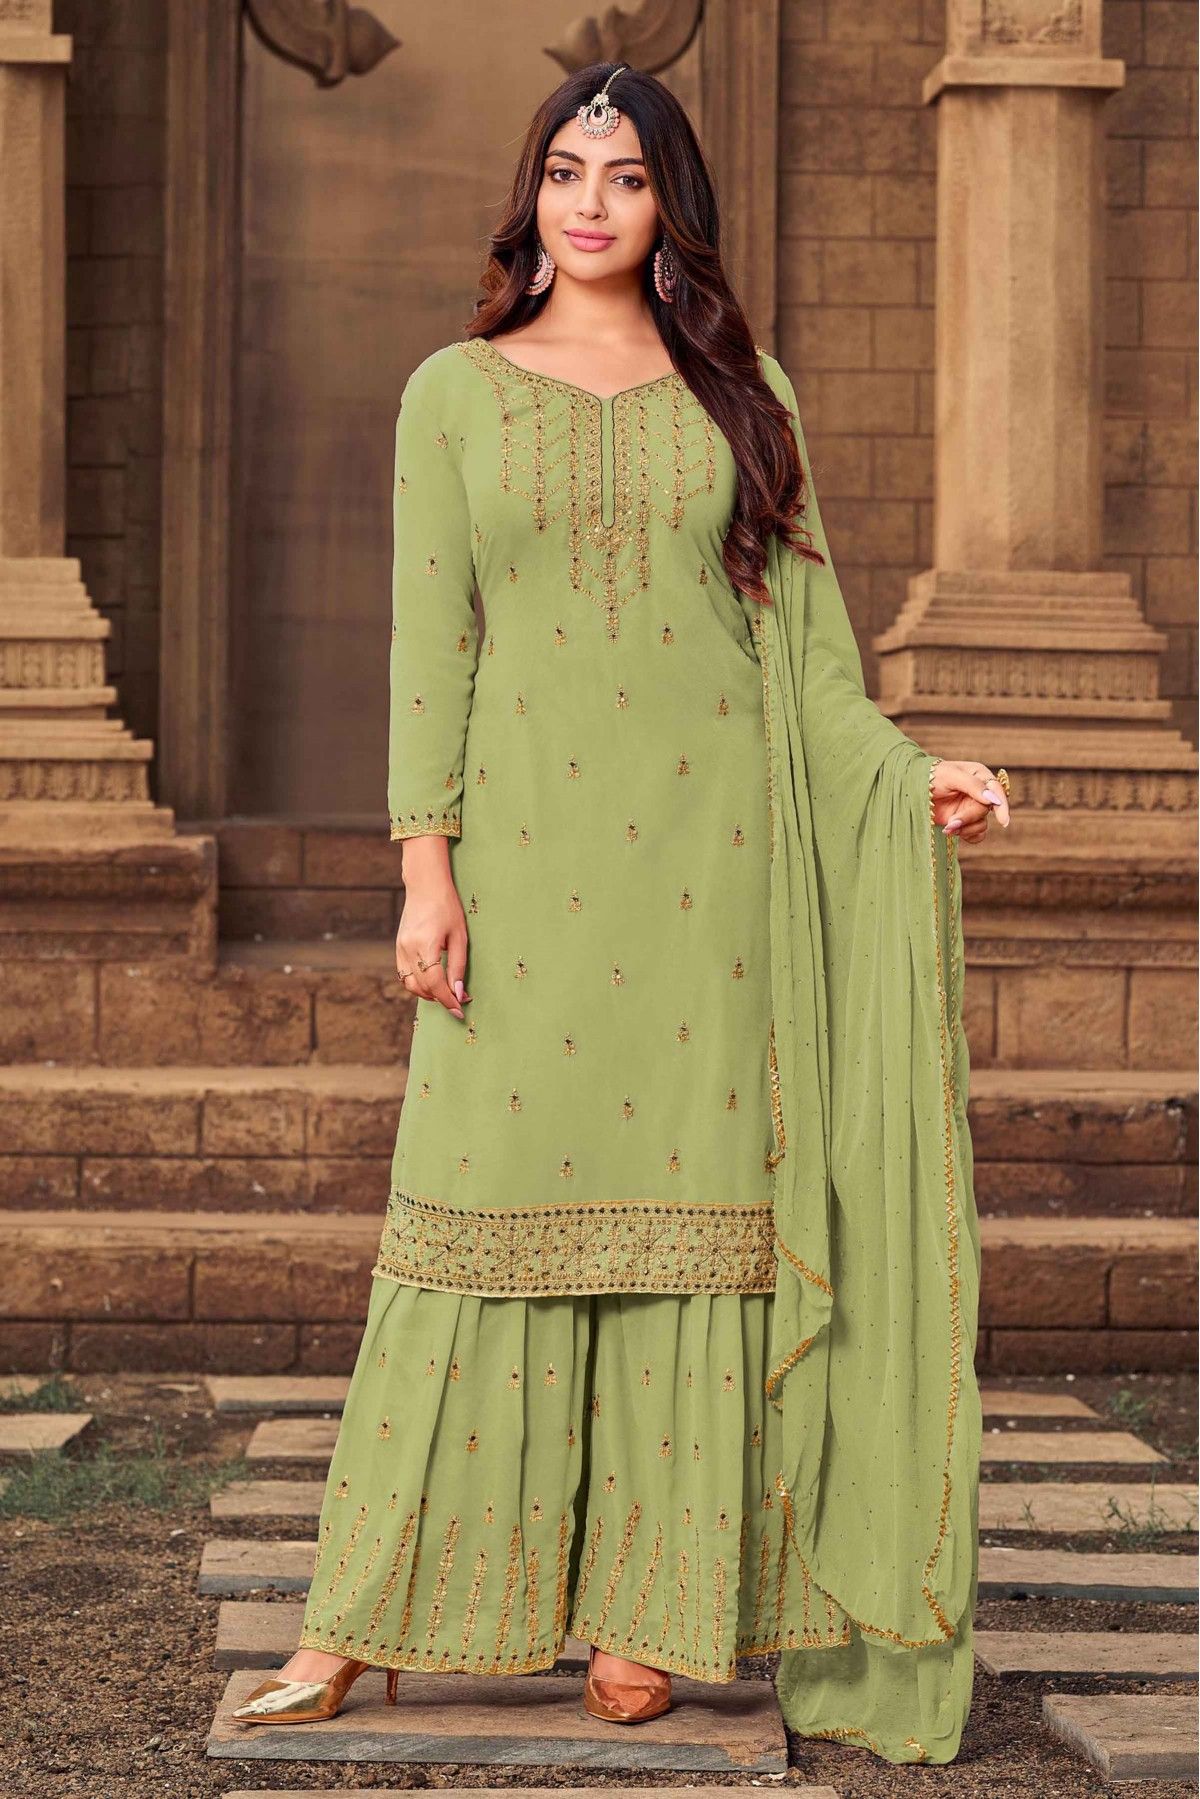 Georgette pakistani suit in Pista green colour 161330 | How to dye fabric,  Salwar kameez, Traditional dresses